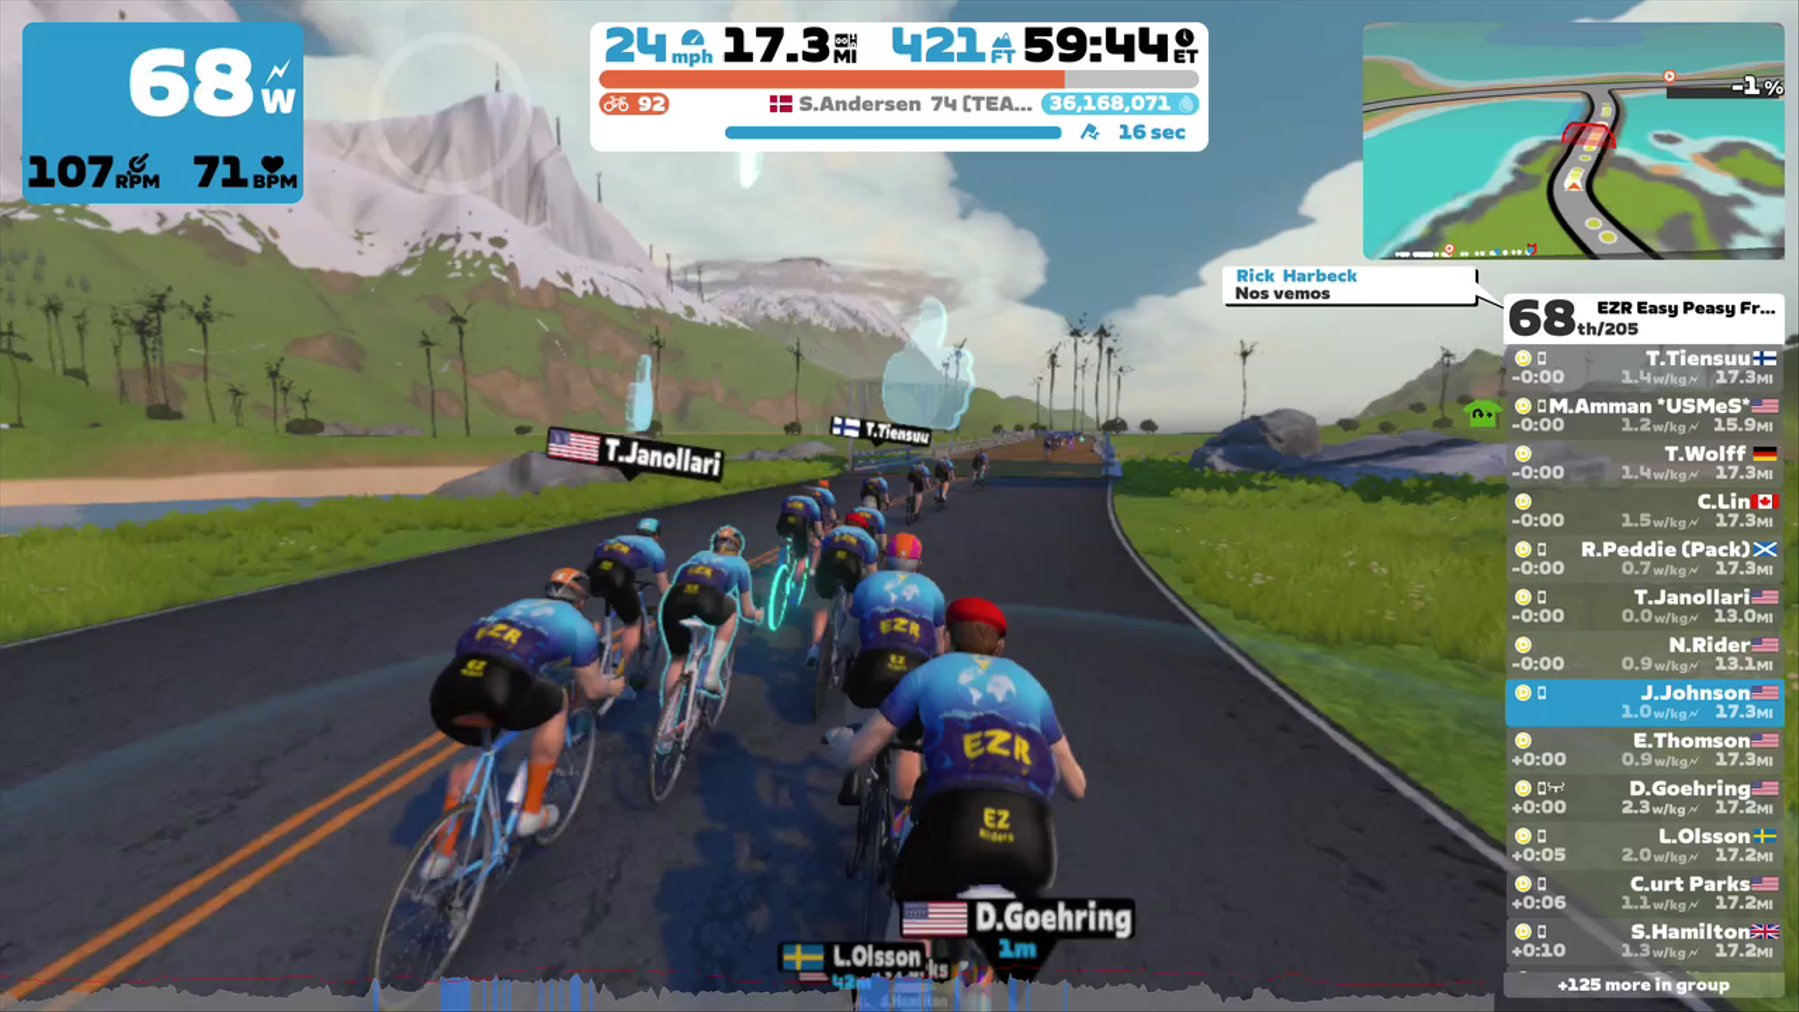 Zwift - Group Ride: EZR Easy Peasy Friday Ride (D) on Sugar Cookie in Watopia